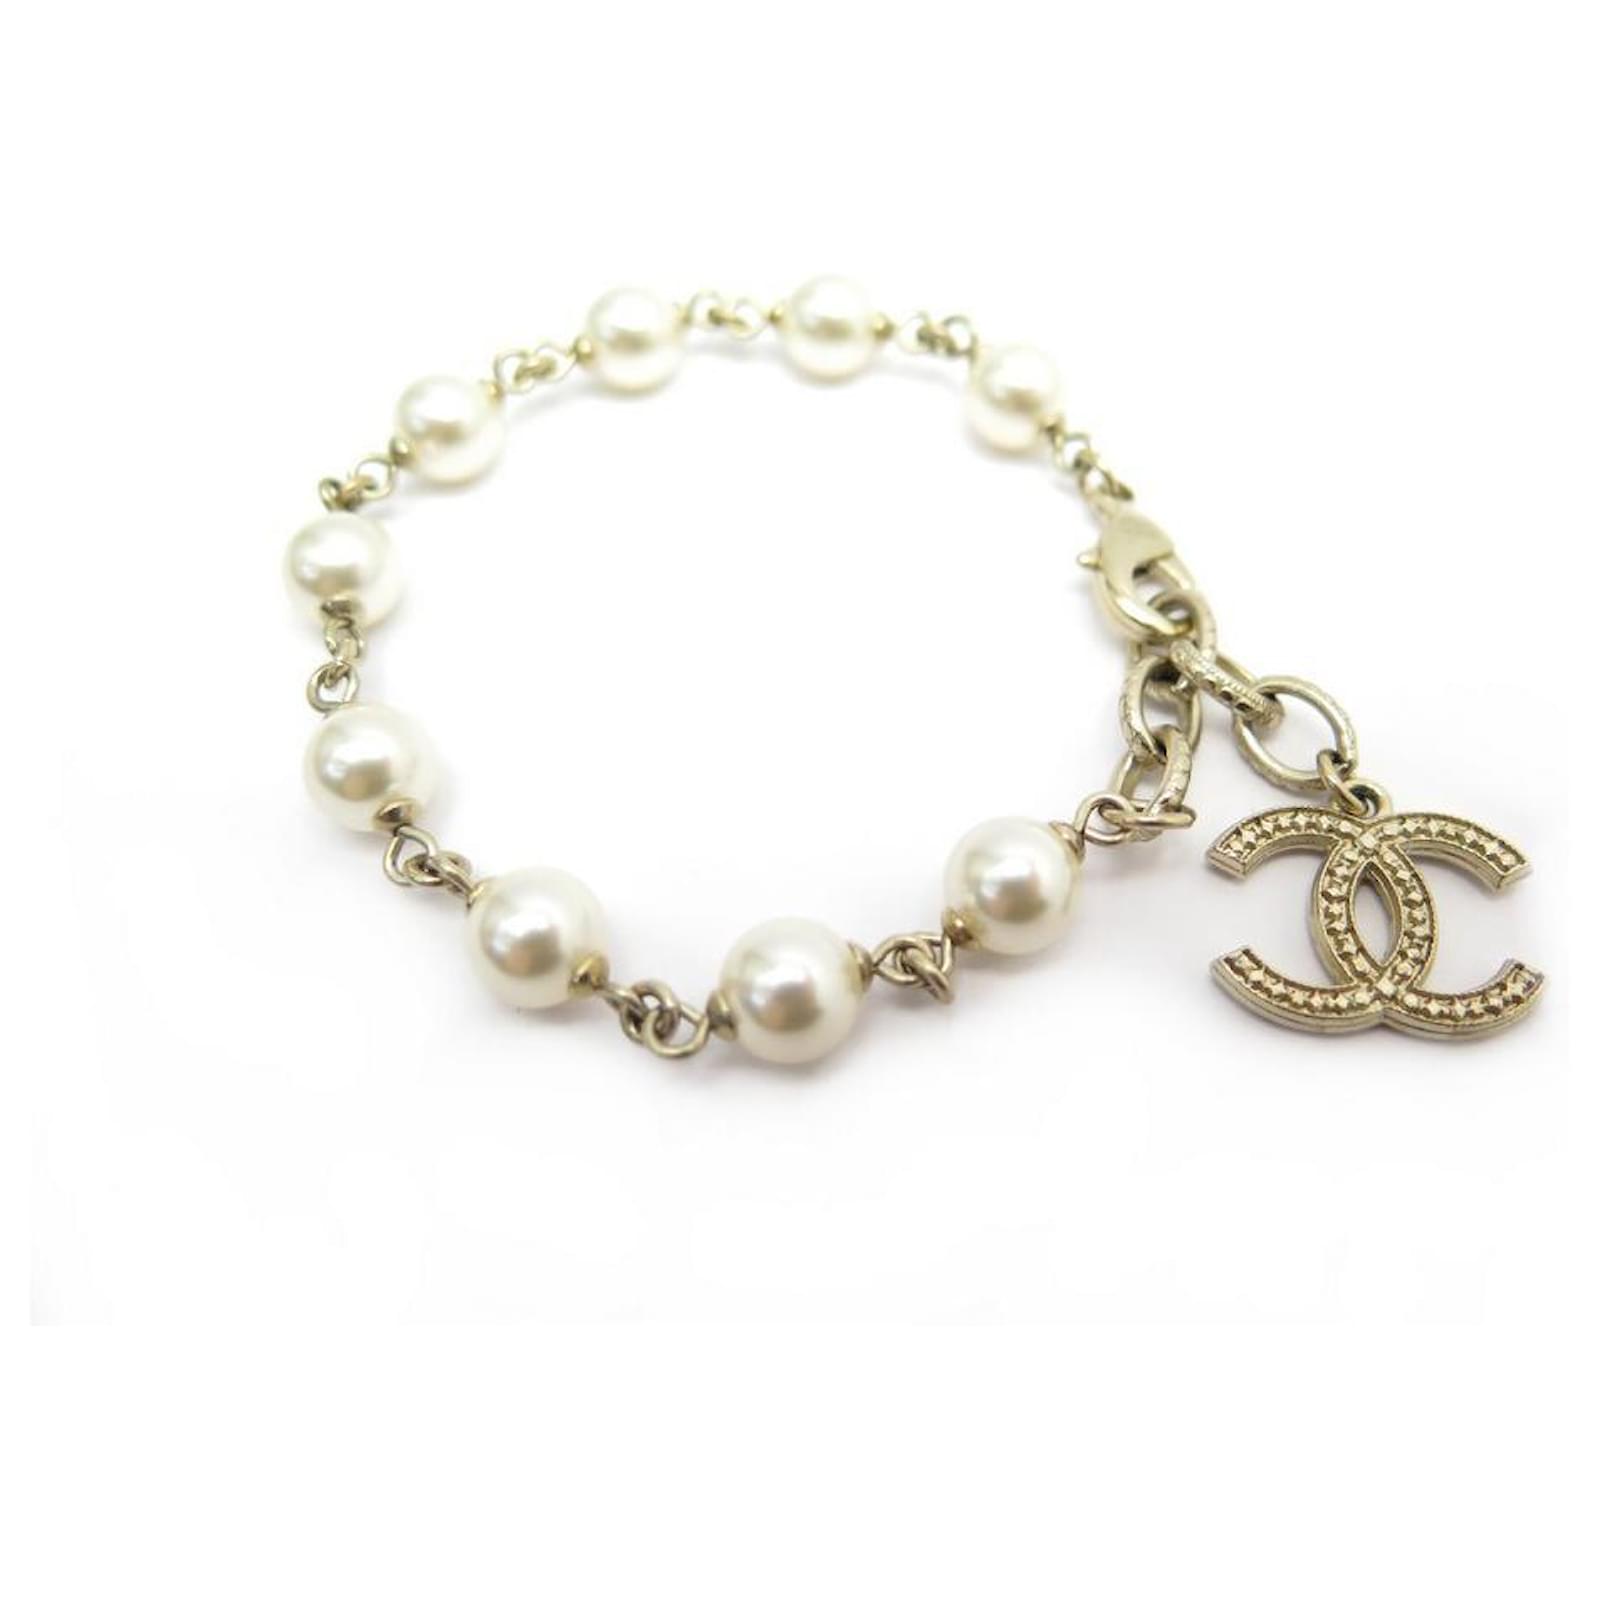 NEW CHANEL PEARL BRACELET & CC LOGO 16 a 19 CM IN METAL GOLD PEARLS NEW ...